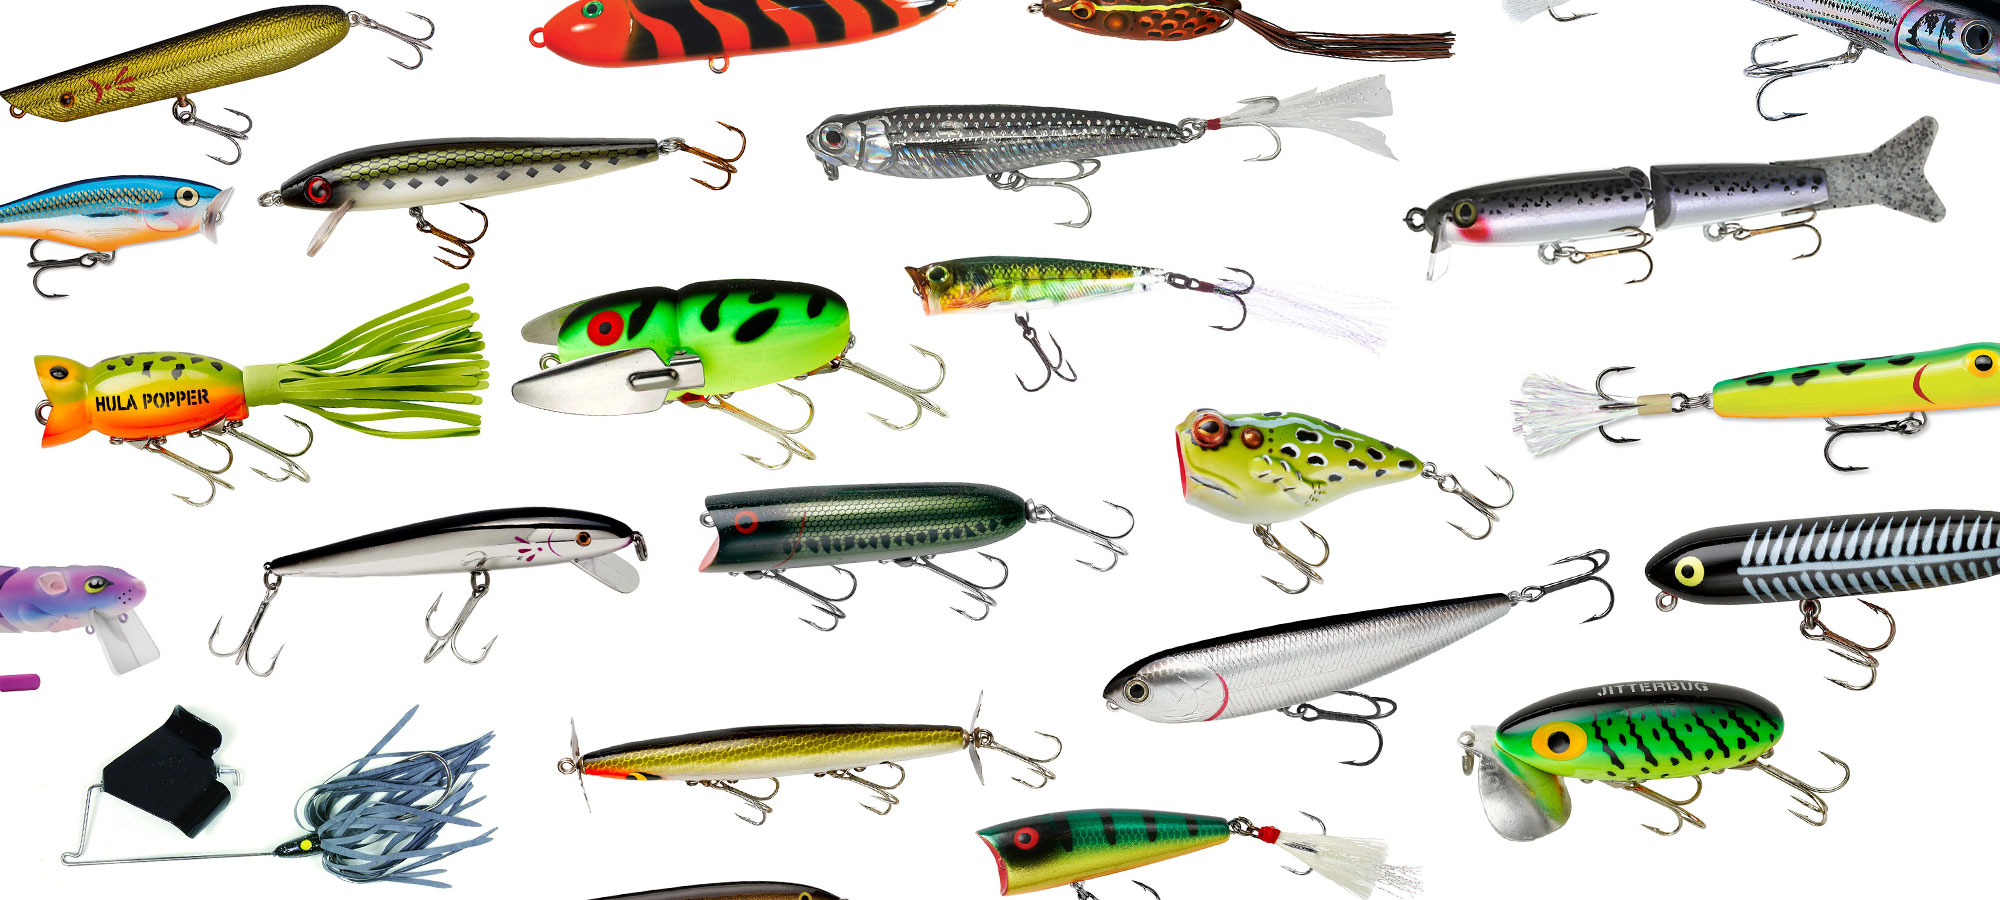 Get on Top with Top Water Lures for Your Summer Fishing